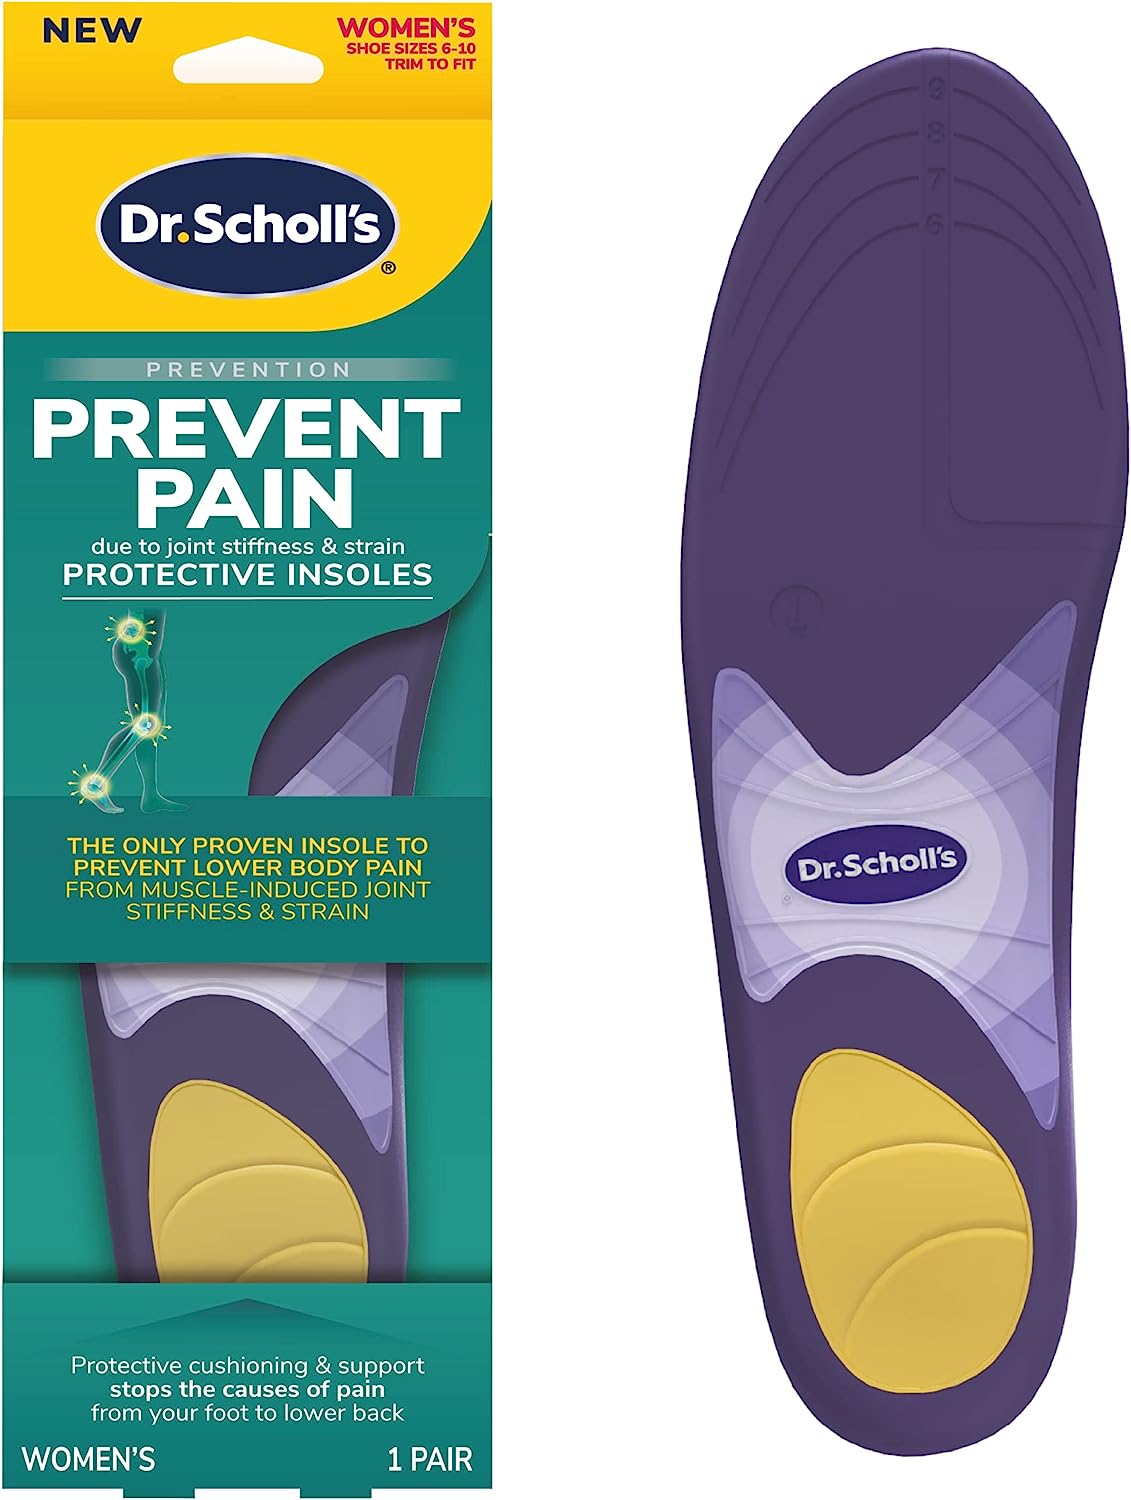 Dr. Scholl's Prevent Pain Lower Body Protective [...]